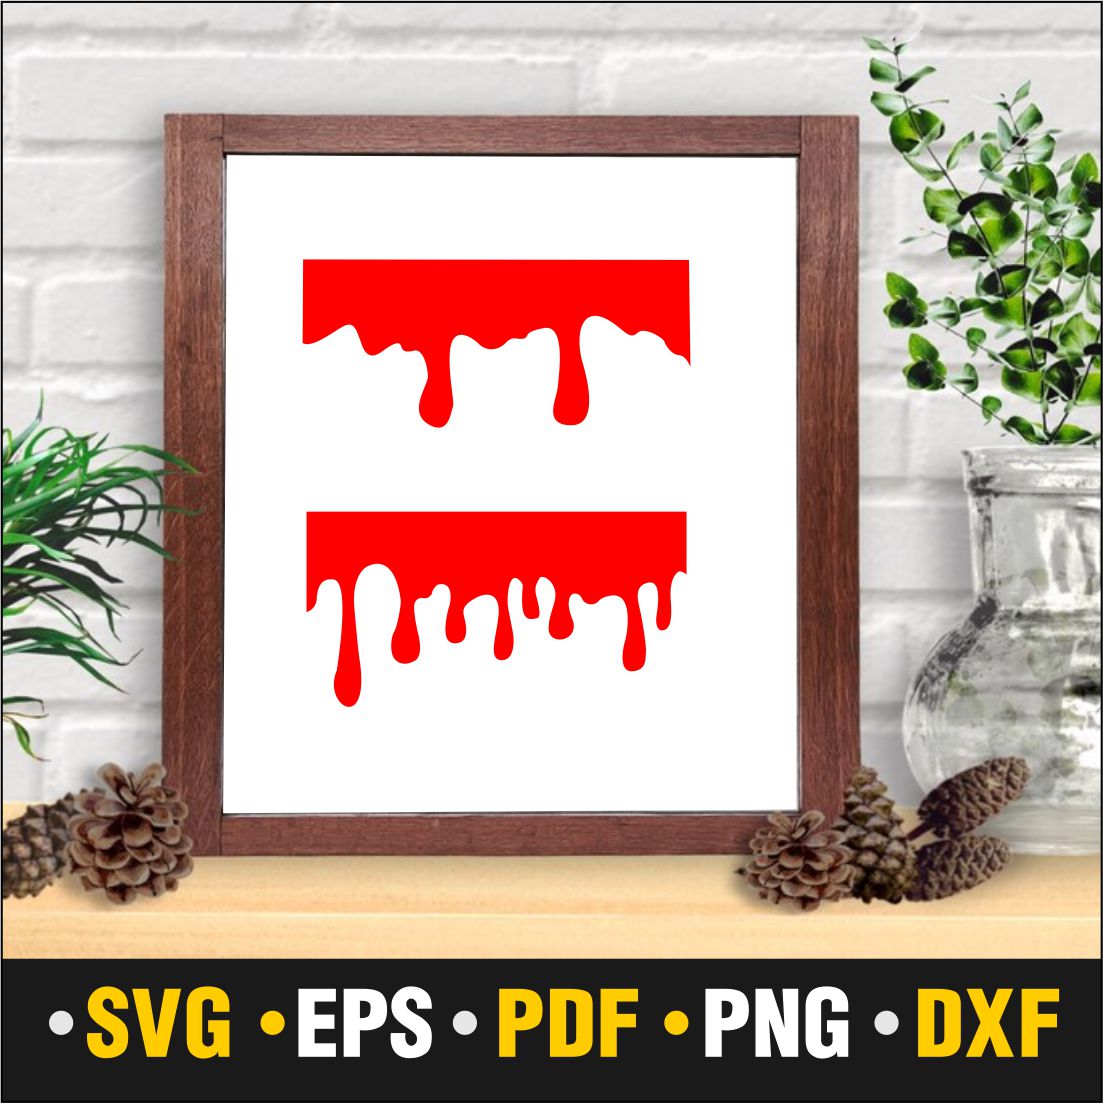 Drip SVG, Dripping SVG, Paint Drip Svg, Dripping Borders Svg, Dripping  Paint Svg, Dripping Cut Files, Dripping Borders Graphics